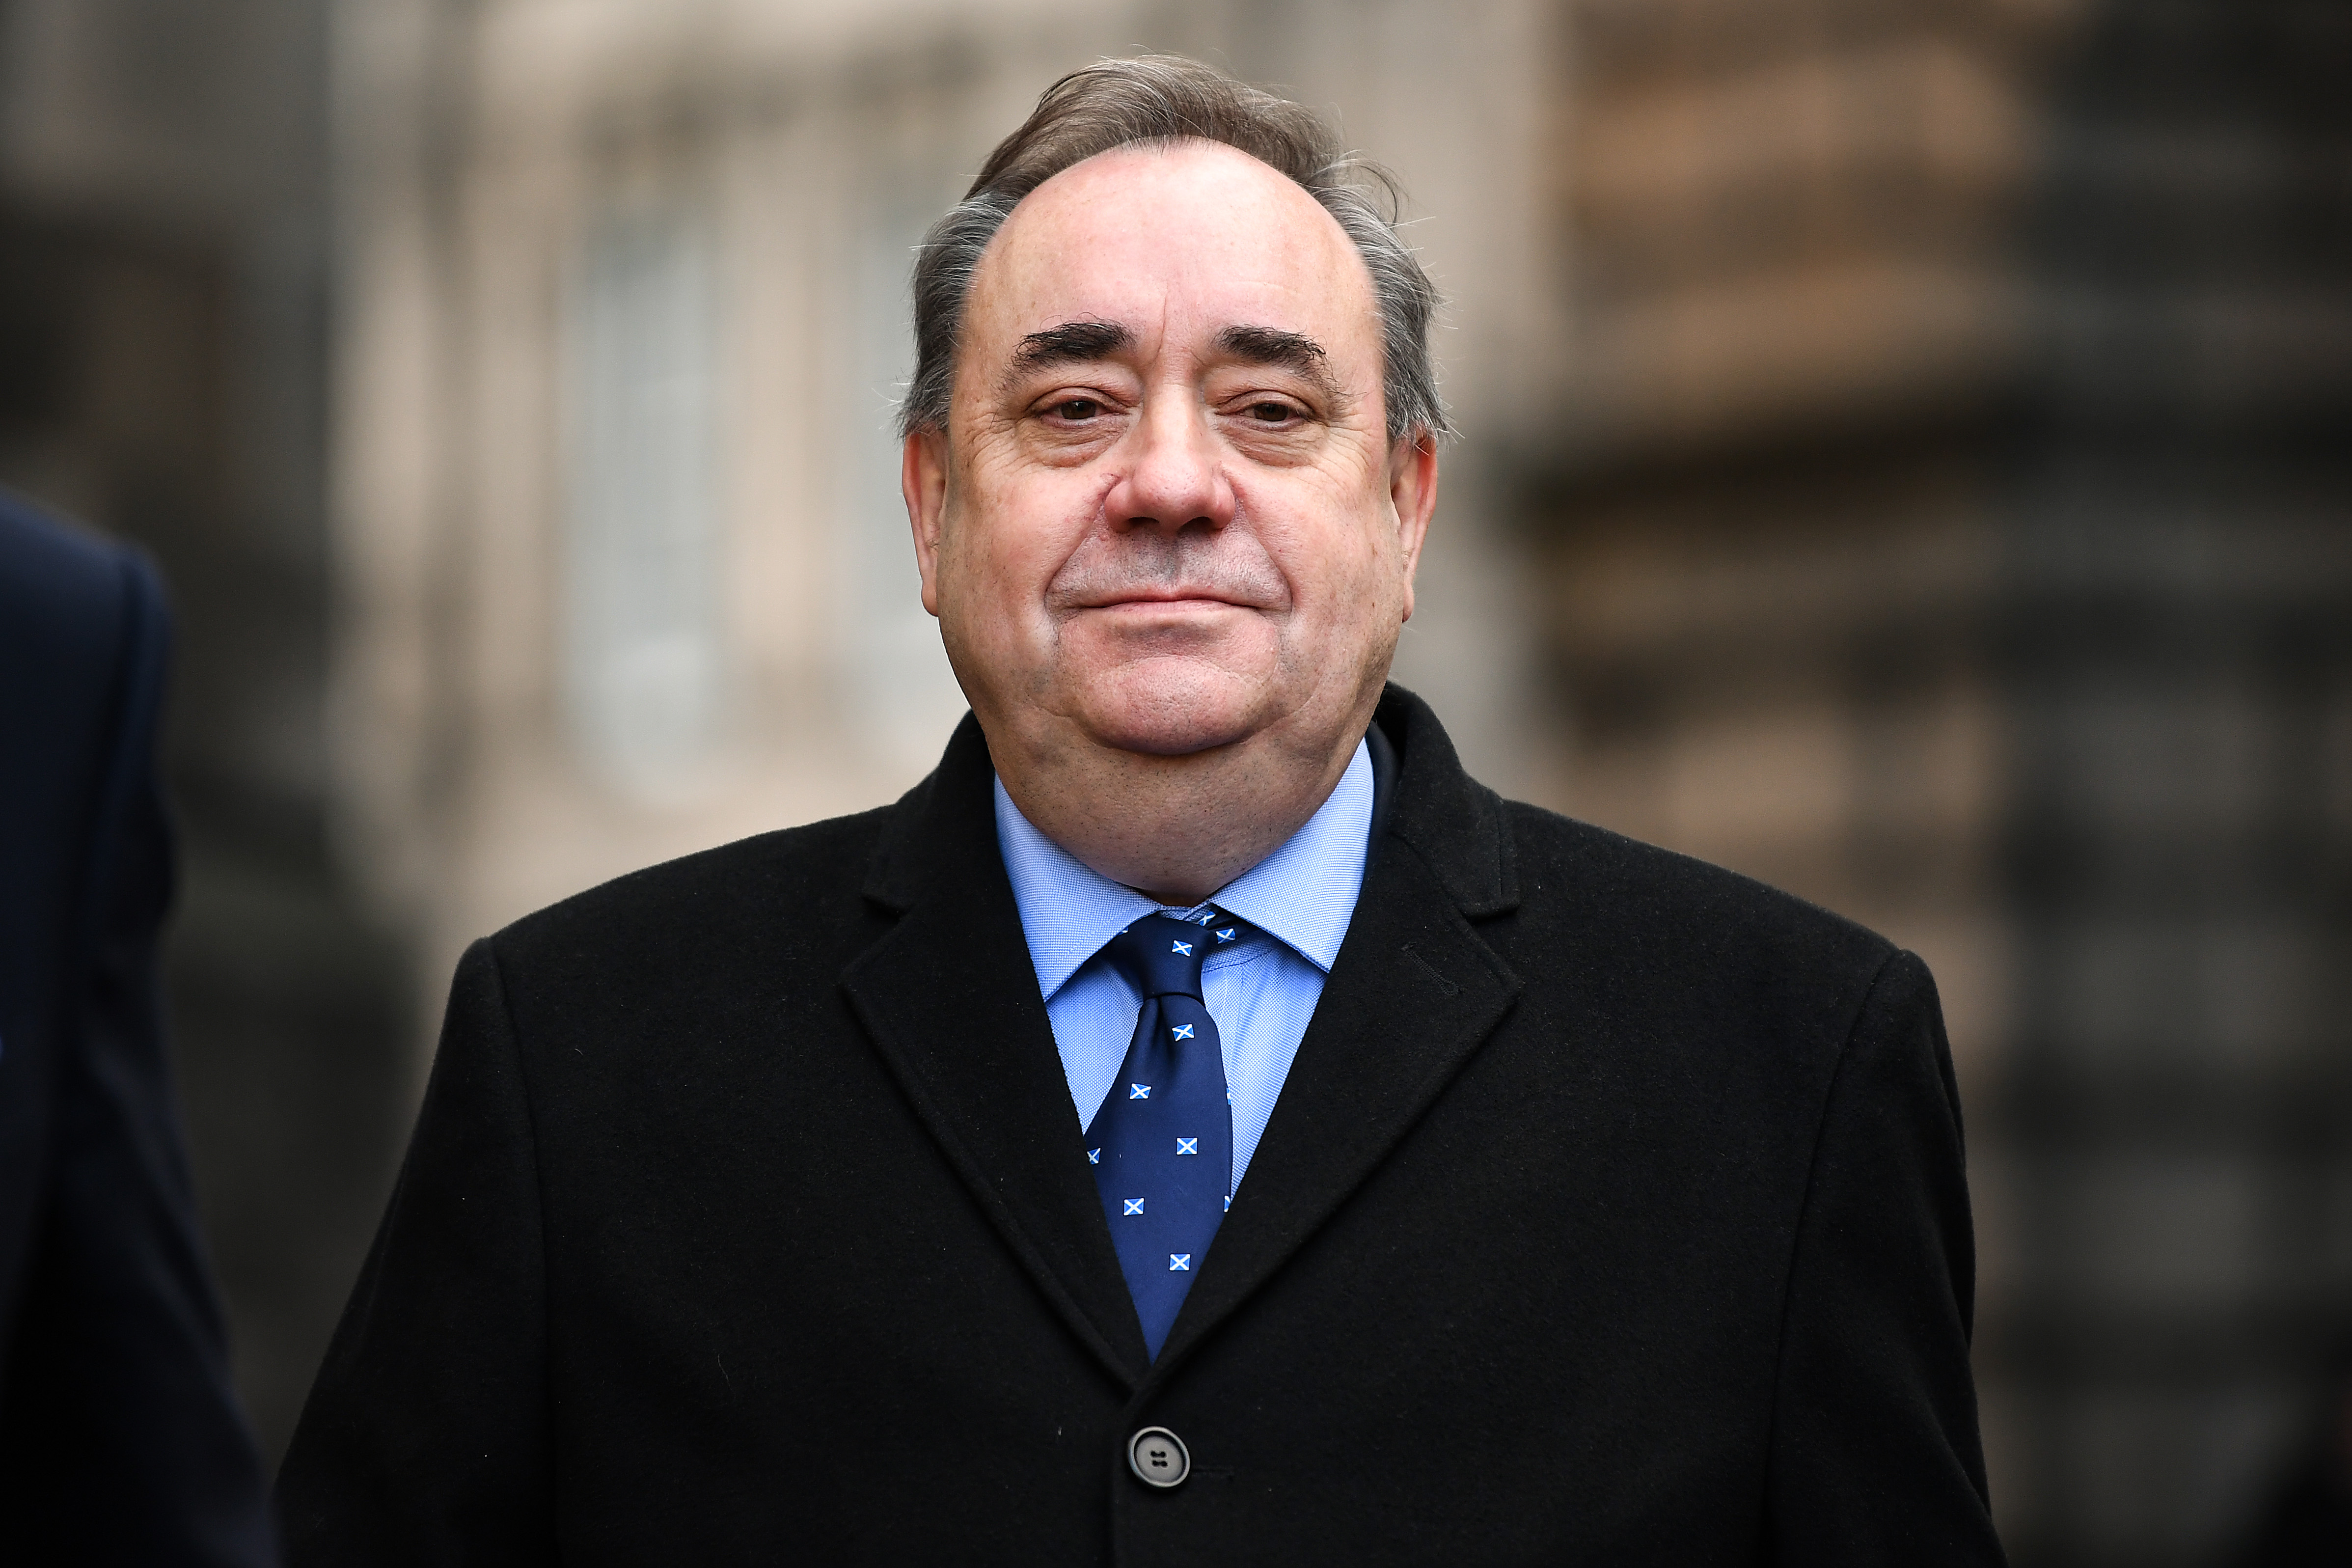 EDINBURGH, SCOTLAND - JANUARY 08: Former Scottish First Minister Alex Salmond delivers a statement outside the Court of Session January 08, 2019 in Edinburgh, Scotland. Scotland's former first minister is pursuing a judicial review of the process the Scottish government used to investigate two complaints of sexual harassment made against him last January. He denies the charges and claims the government investigation was "unfair and unjust." (Photo by Jeff J Mitchell/Getty Images)